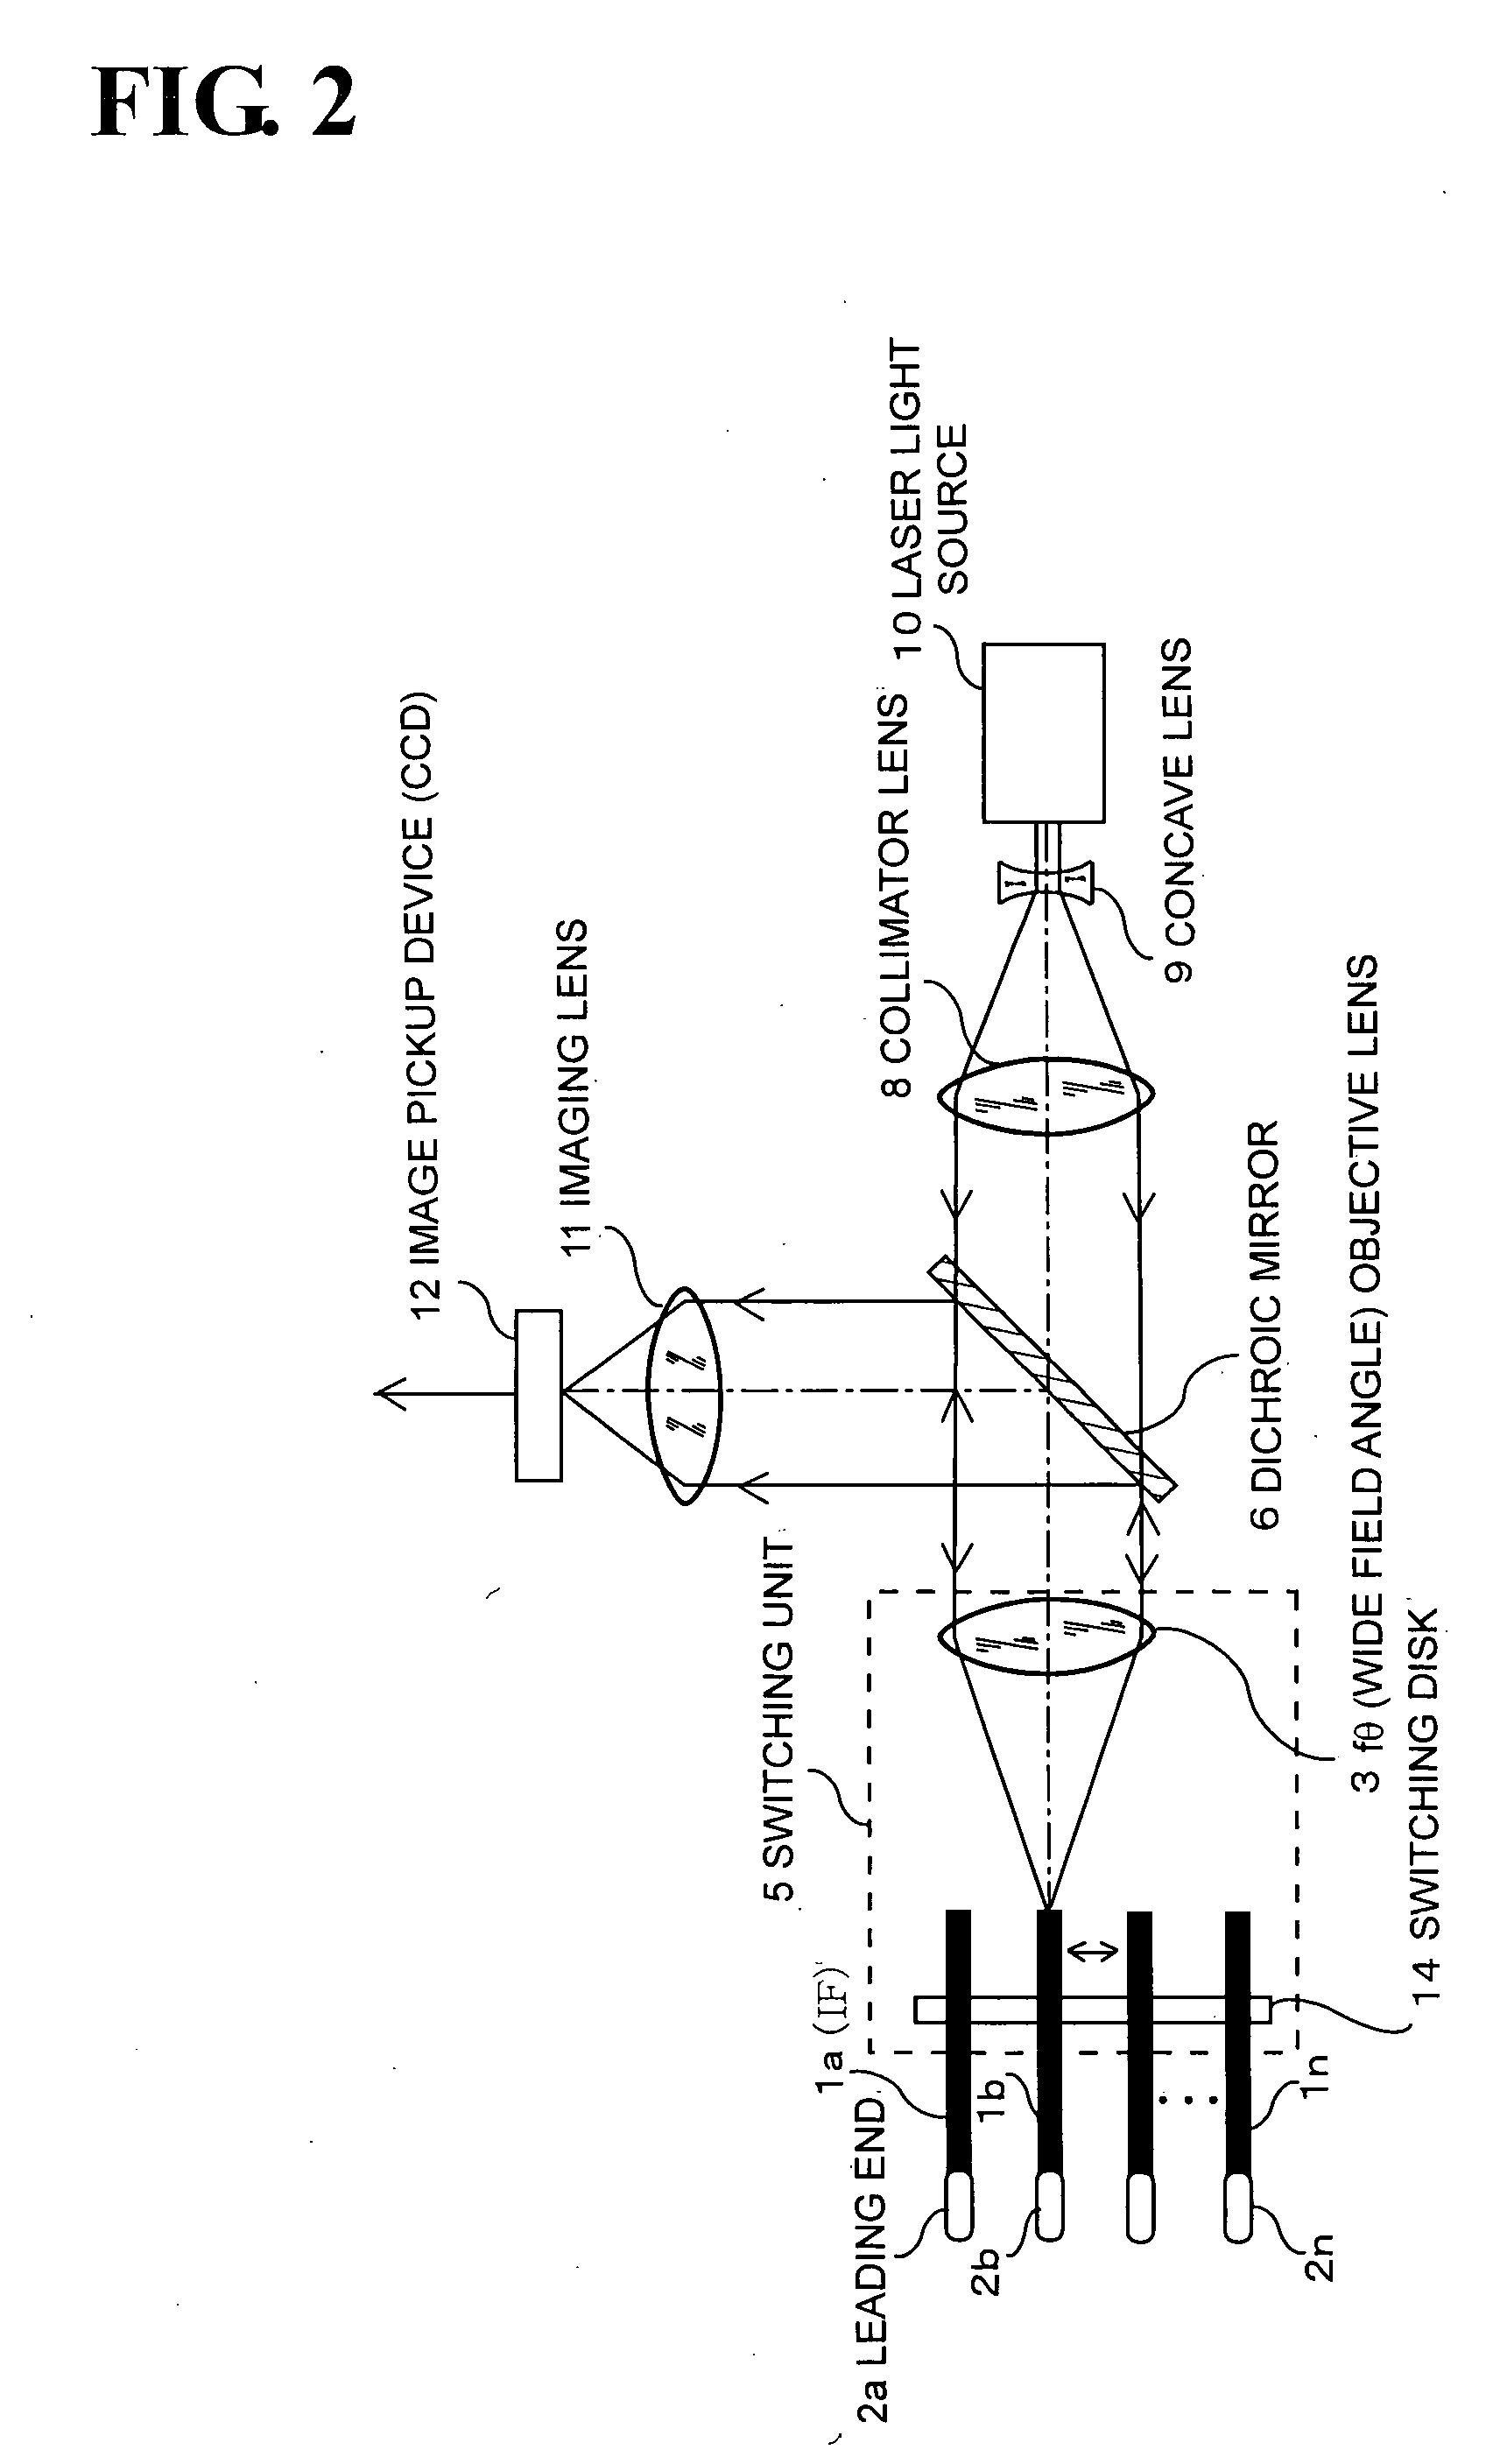 Switch-type imaging fiber apparatus and branch-type imaging fiber apparatus